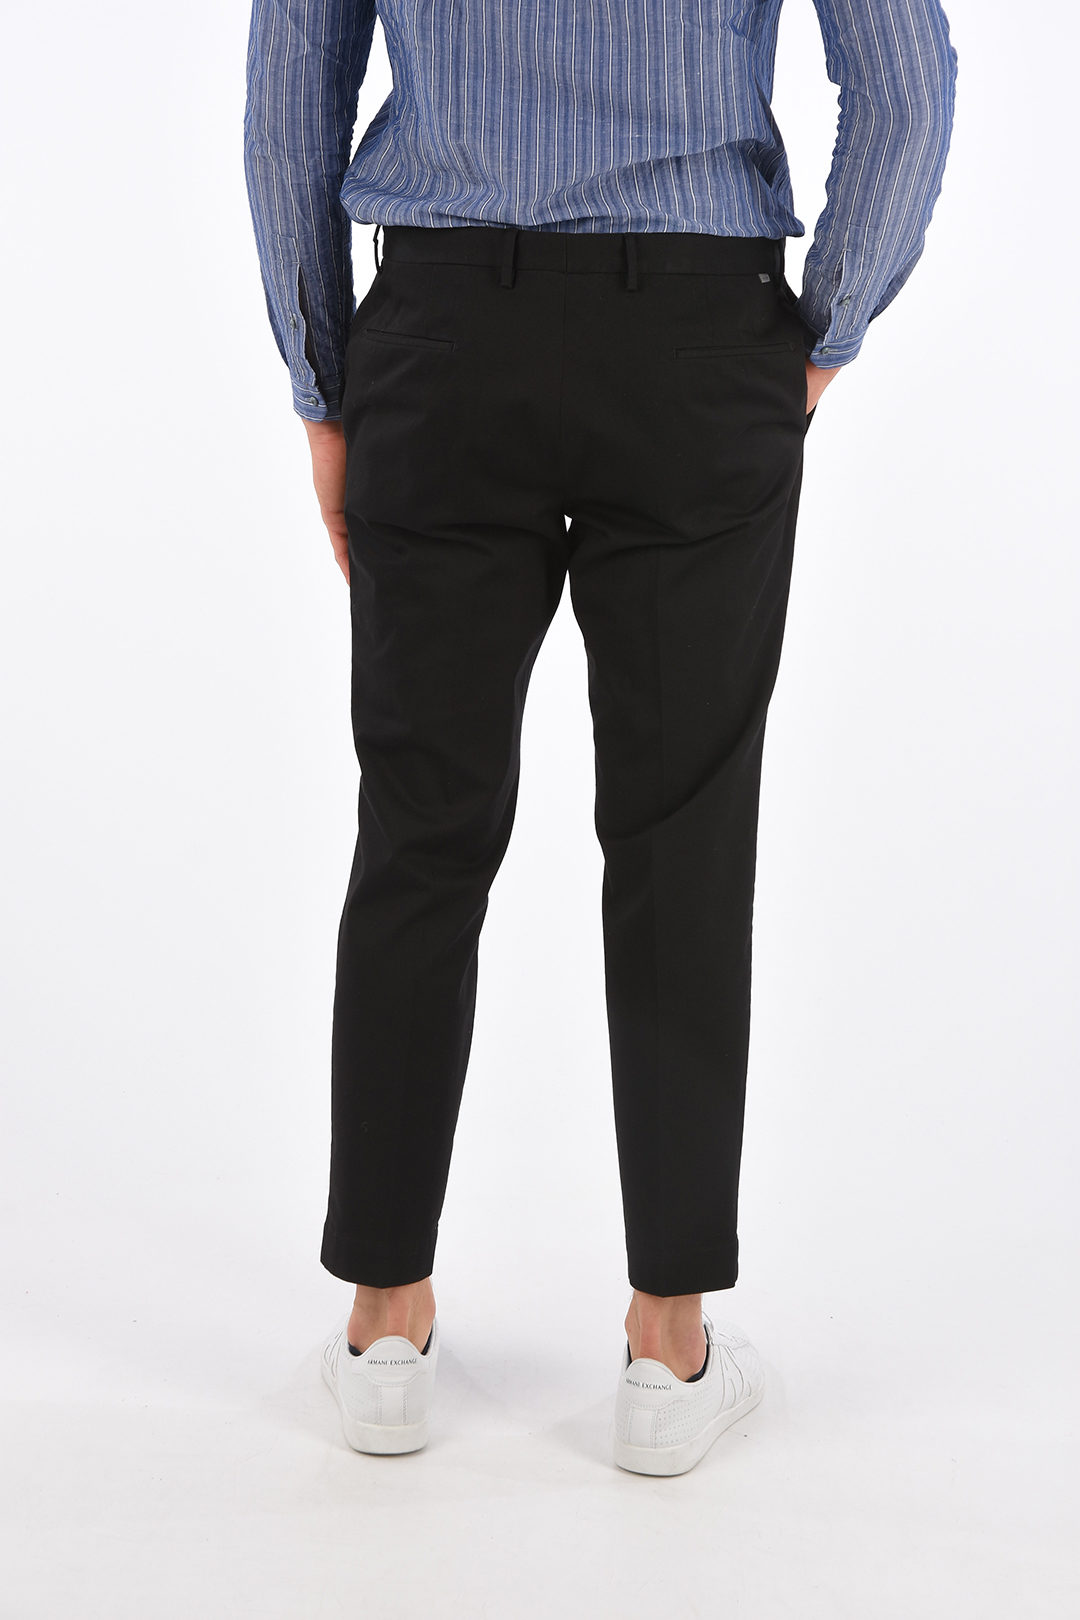 Incotex Low-rise waist chinos men - Glamood Outlet